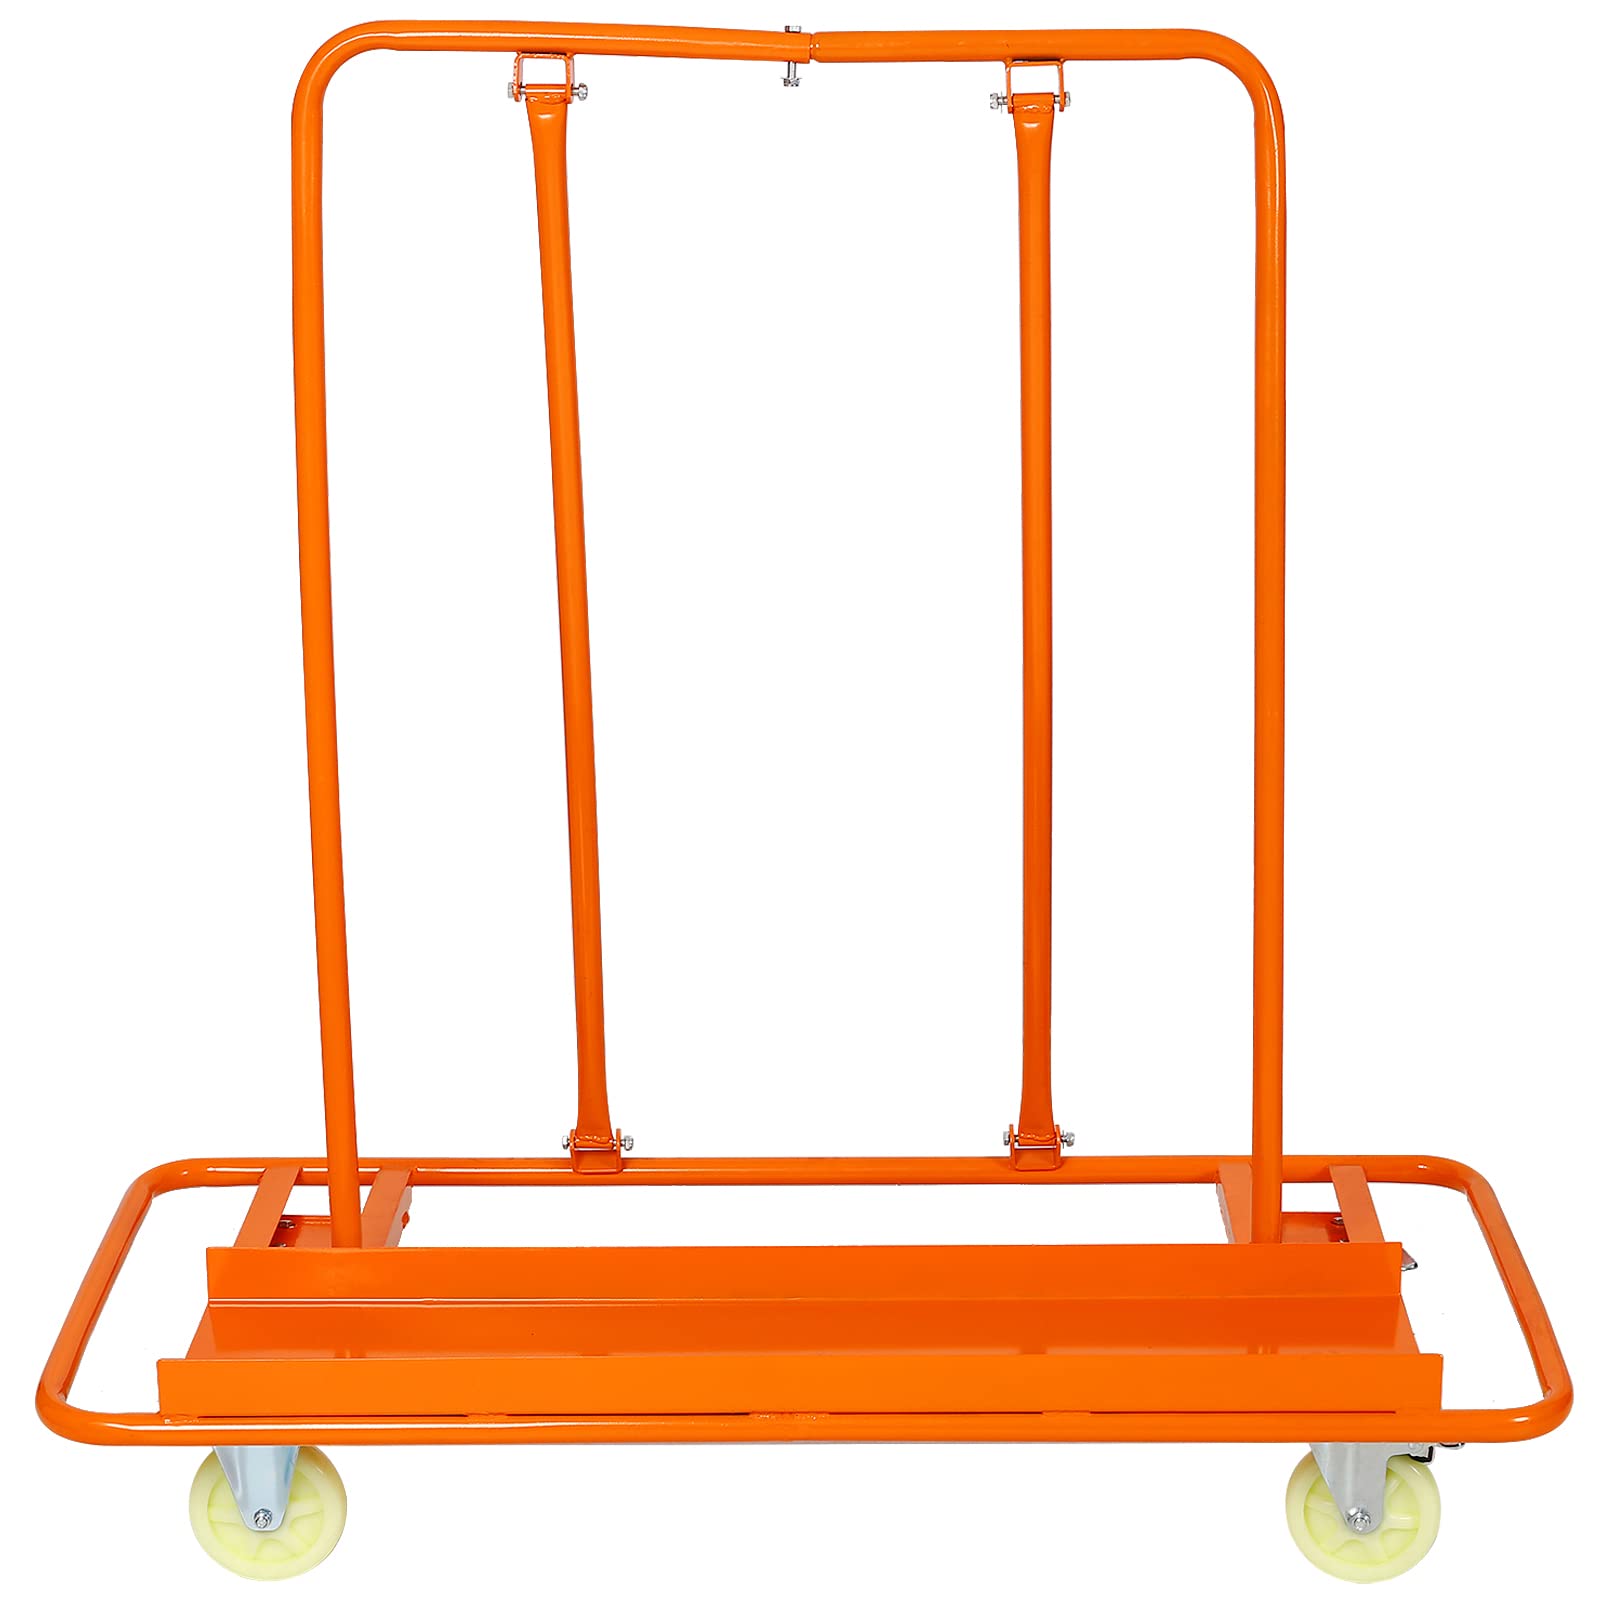 Veemuaro Heavy Duty Drywall Sheet Cart, Panel Dolly Cart 1600LBS Load Capacity with Four 5" Wheels, Service Cart for Garage, Home, Warehouse (Orange)